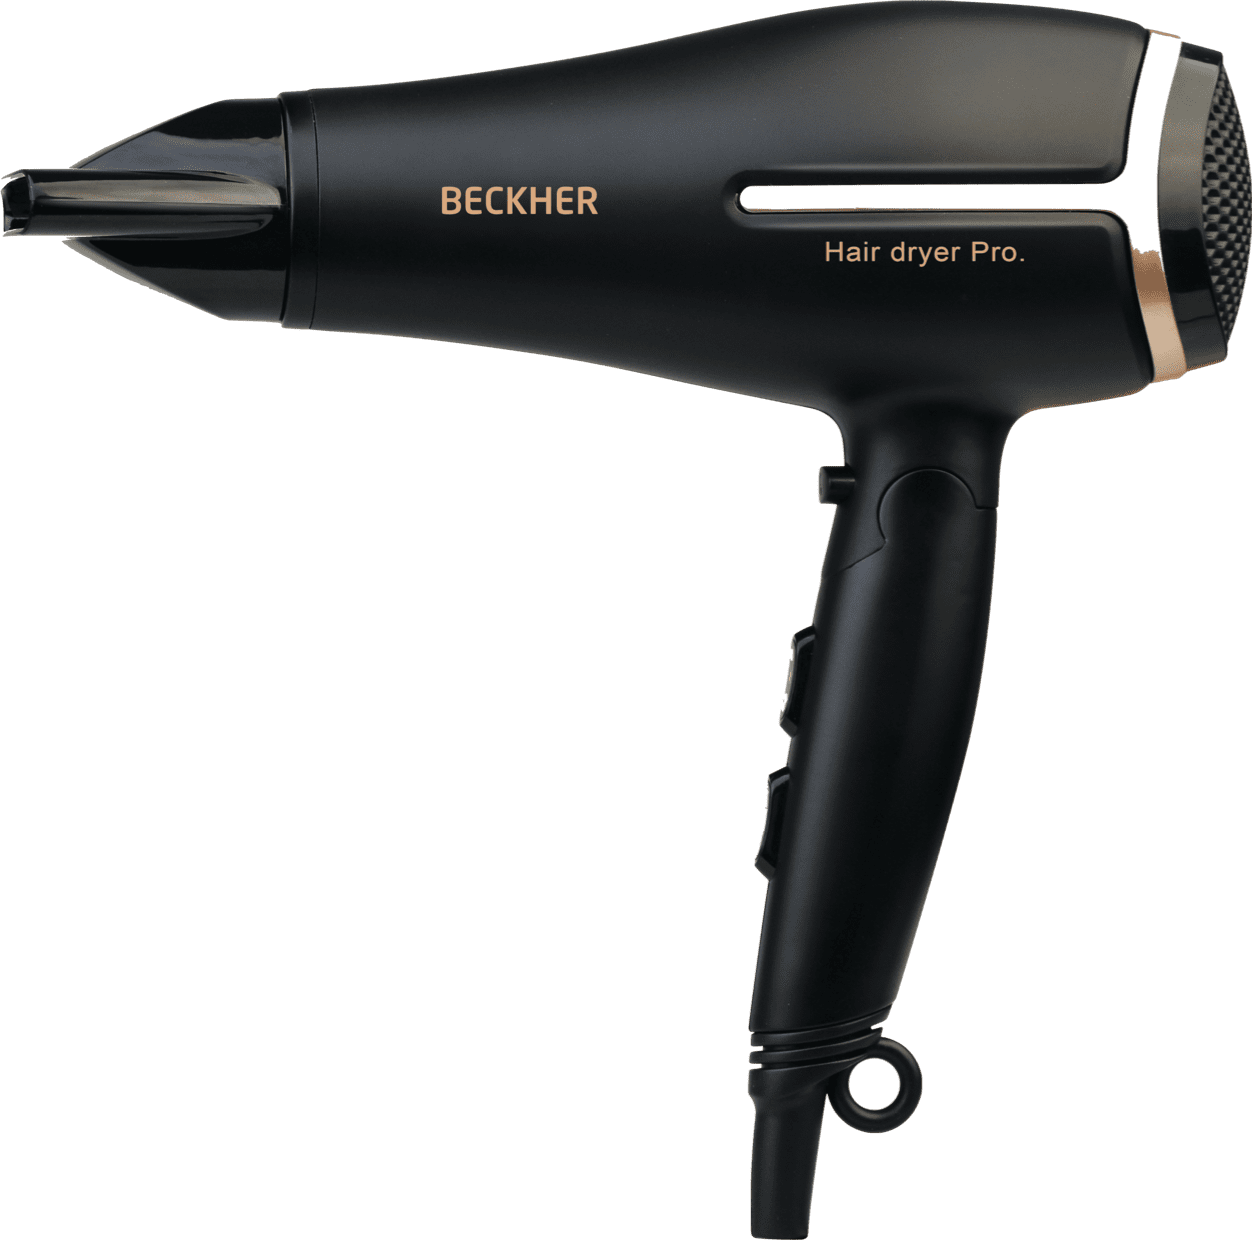 Hair Dryer by Beckher, product number MI-HD 1301B